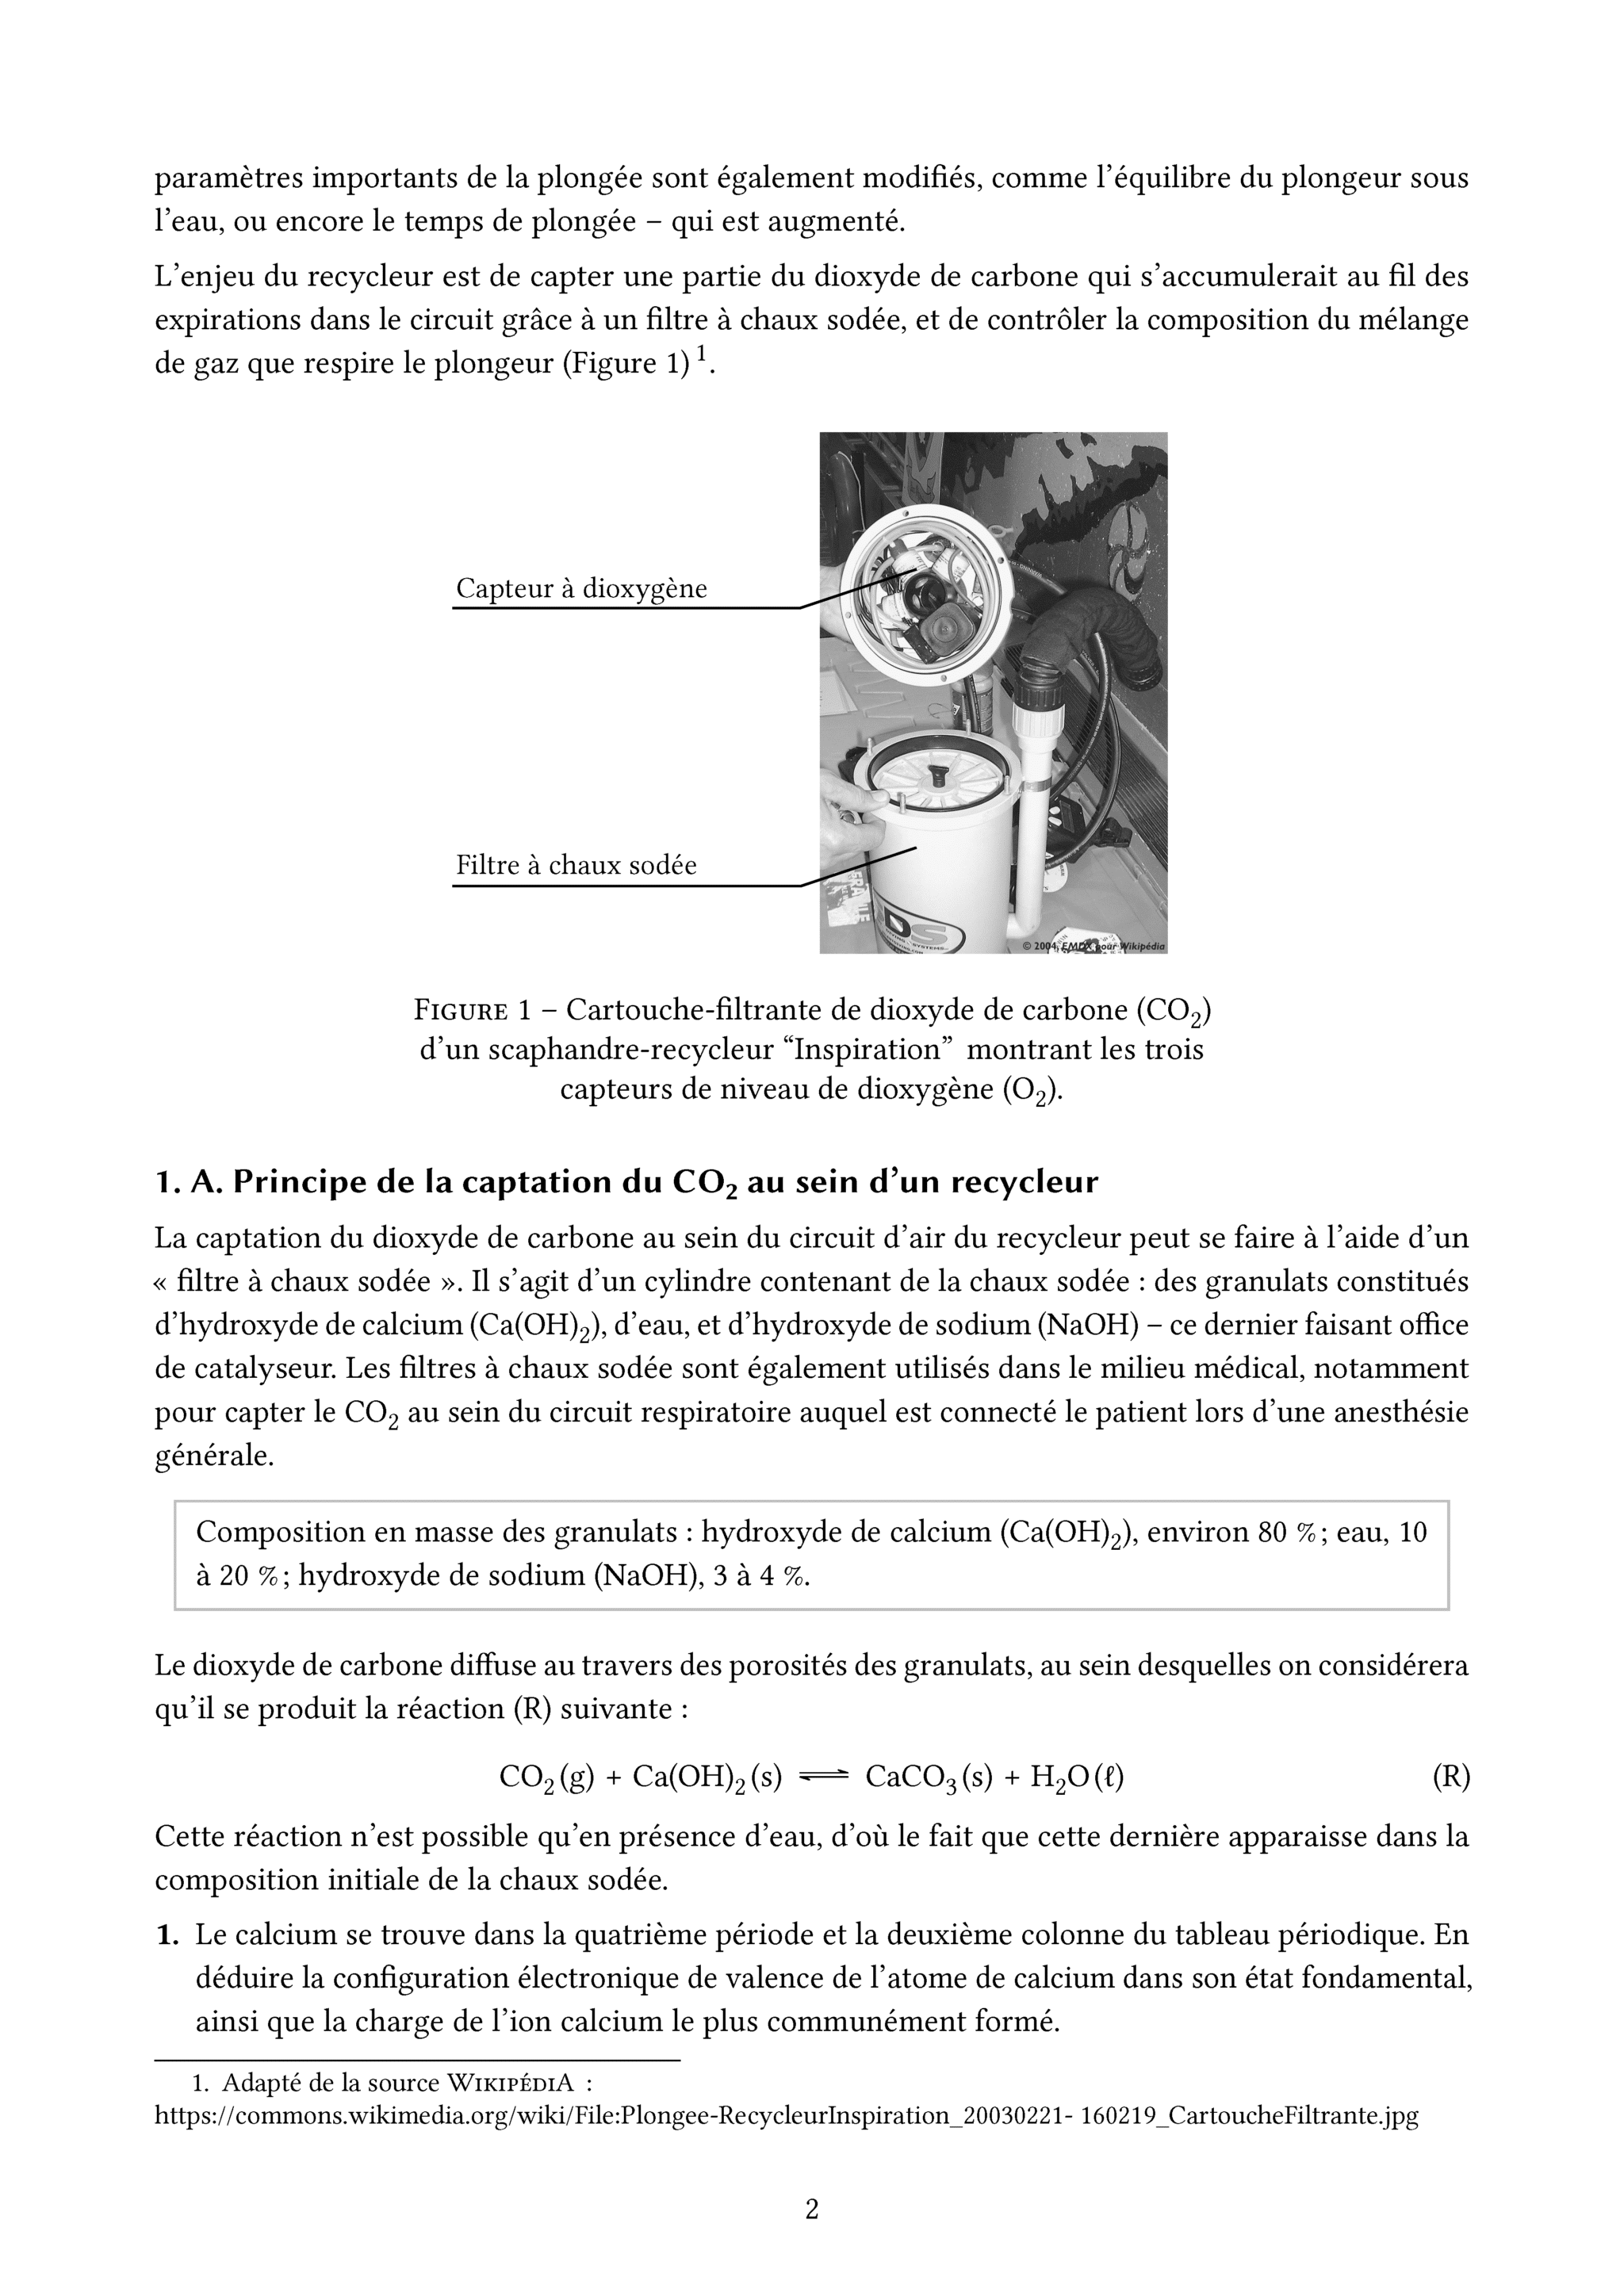 abcpst_sp_0323_chimie_Page_02